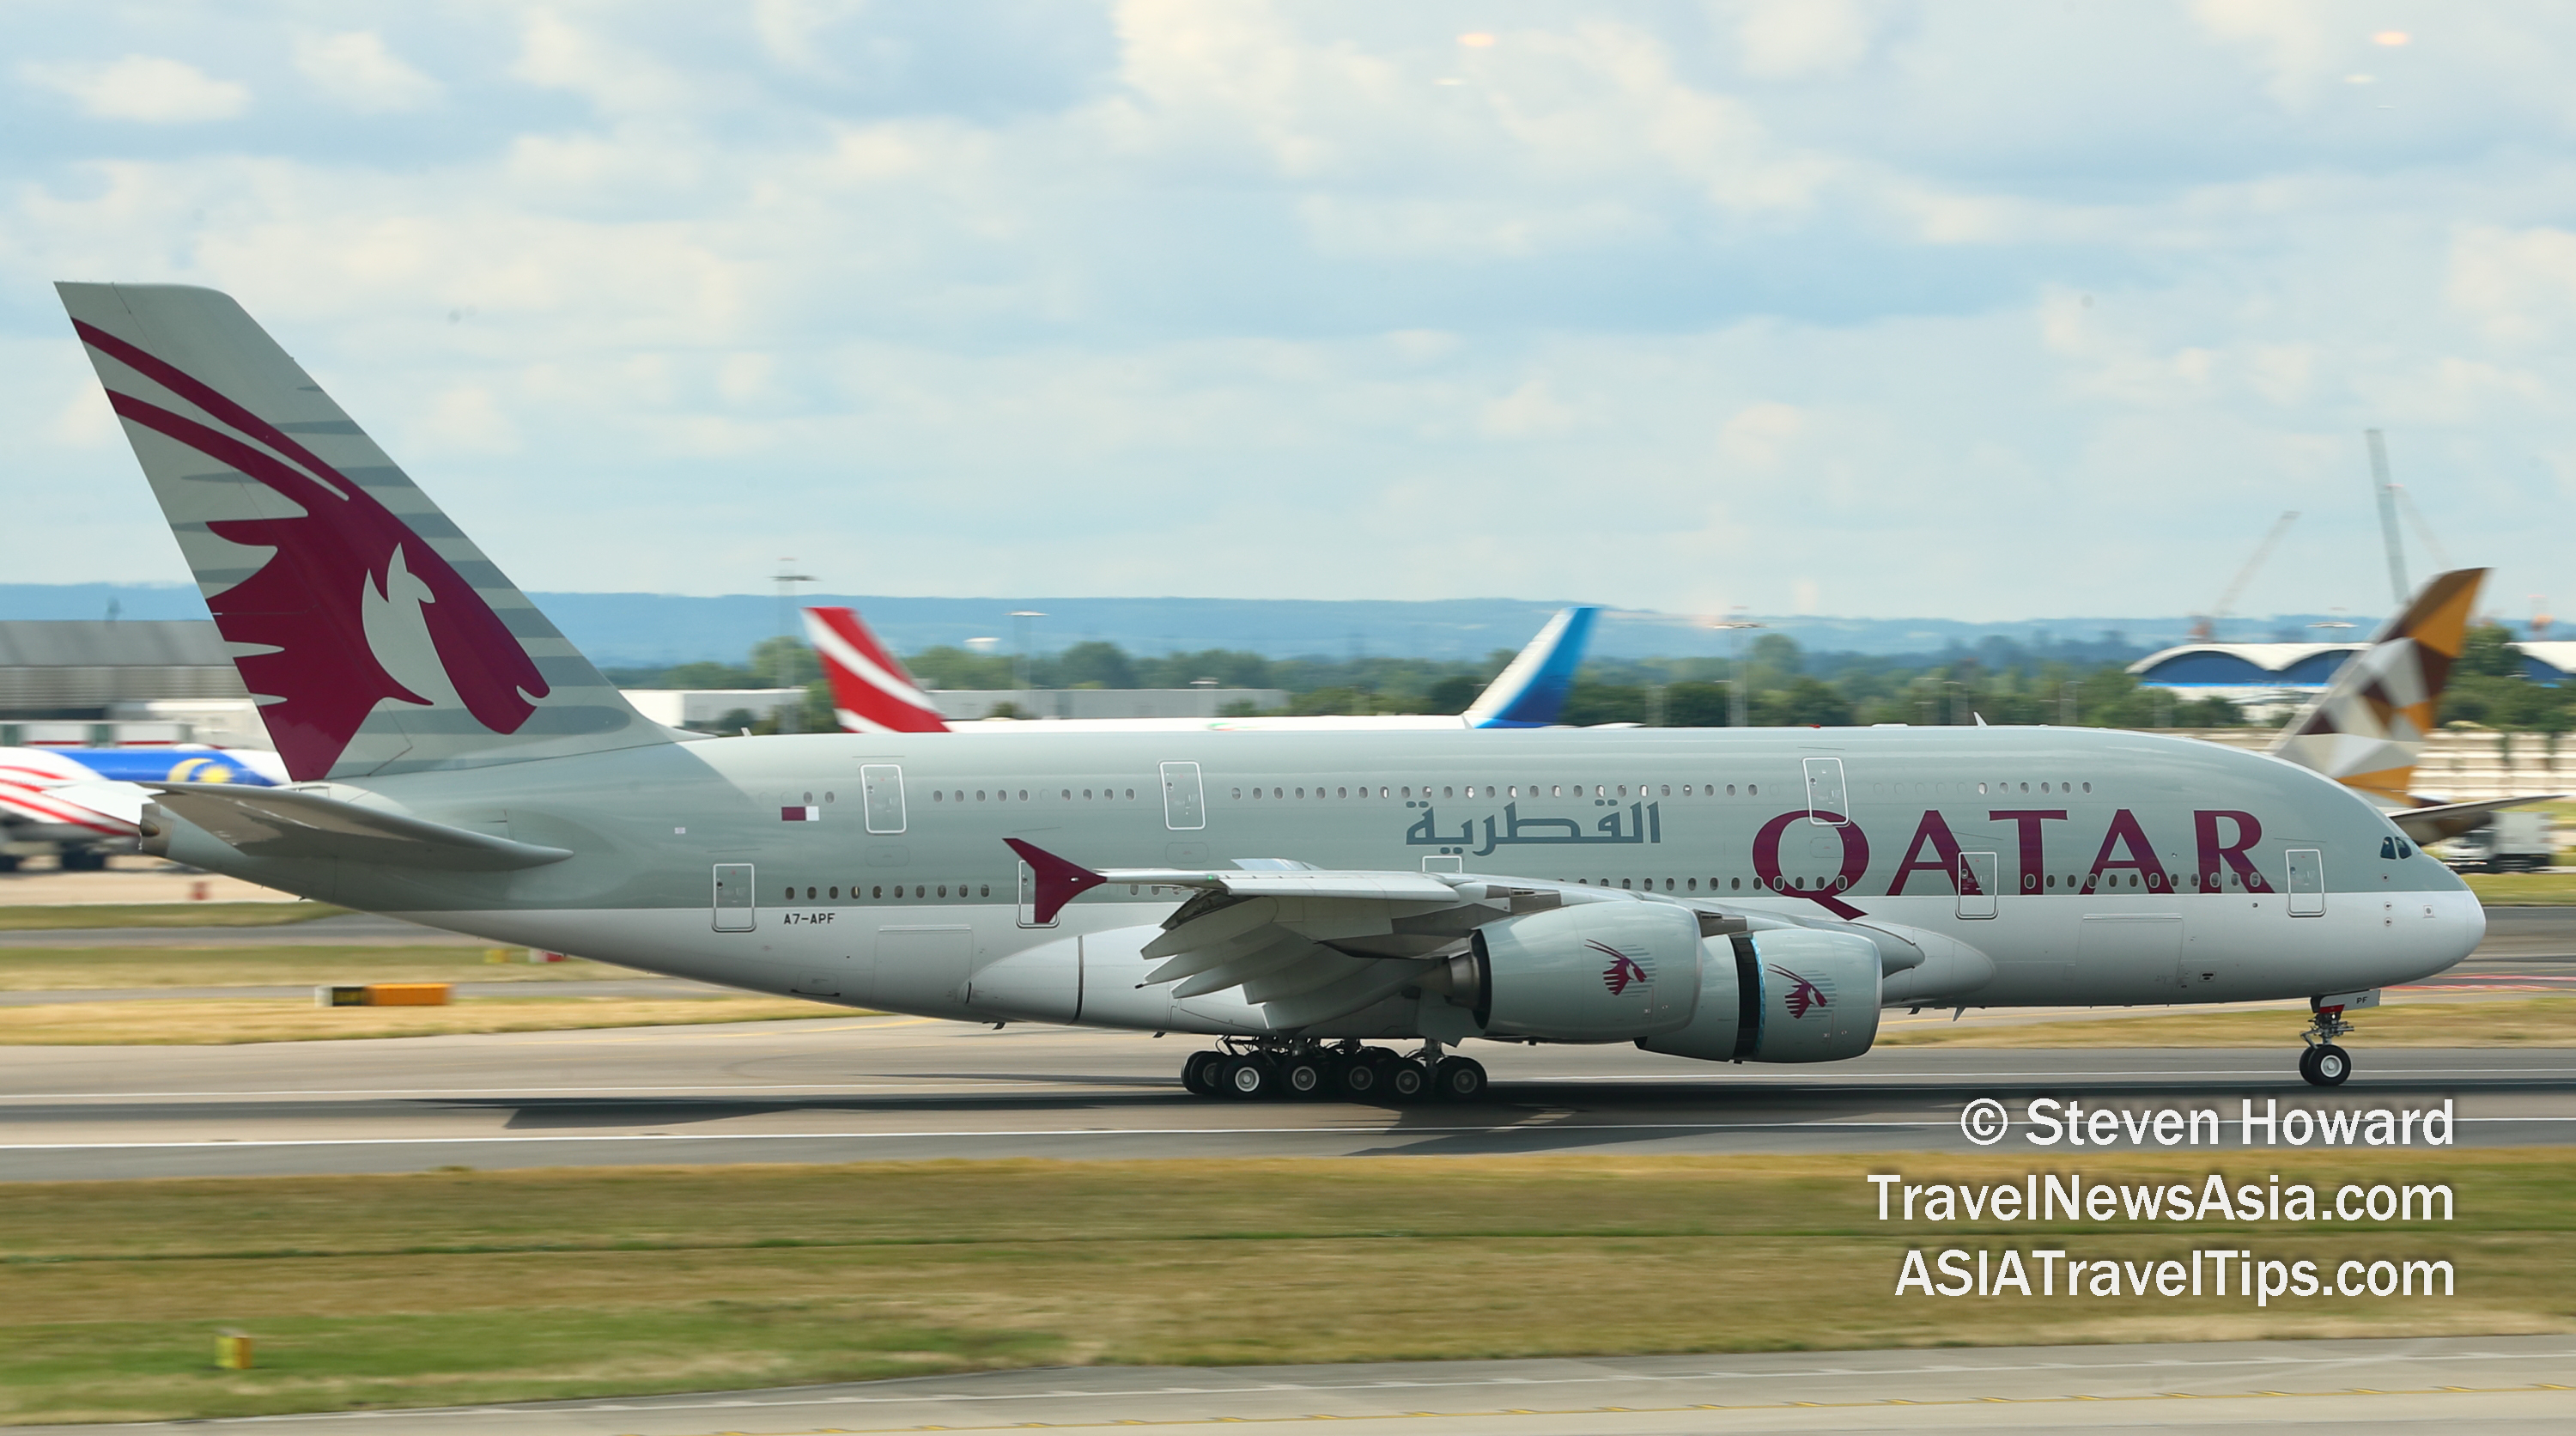 Qatar Airways A380 reg: A7-APF. Picture by Steven Howard of TravelNewsAsia.com Click to enlarge.